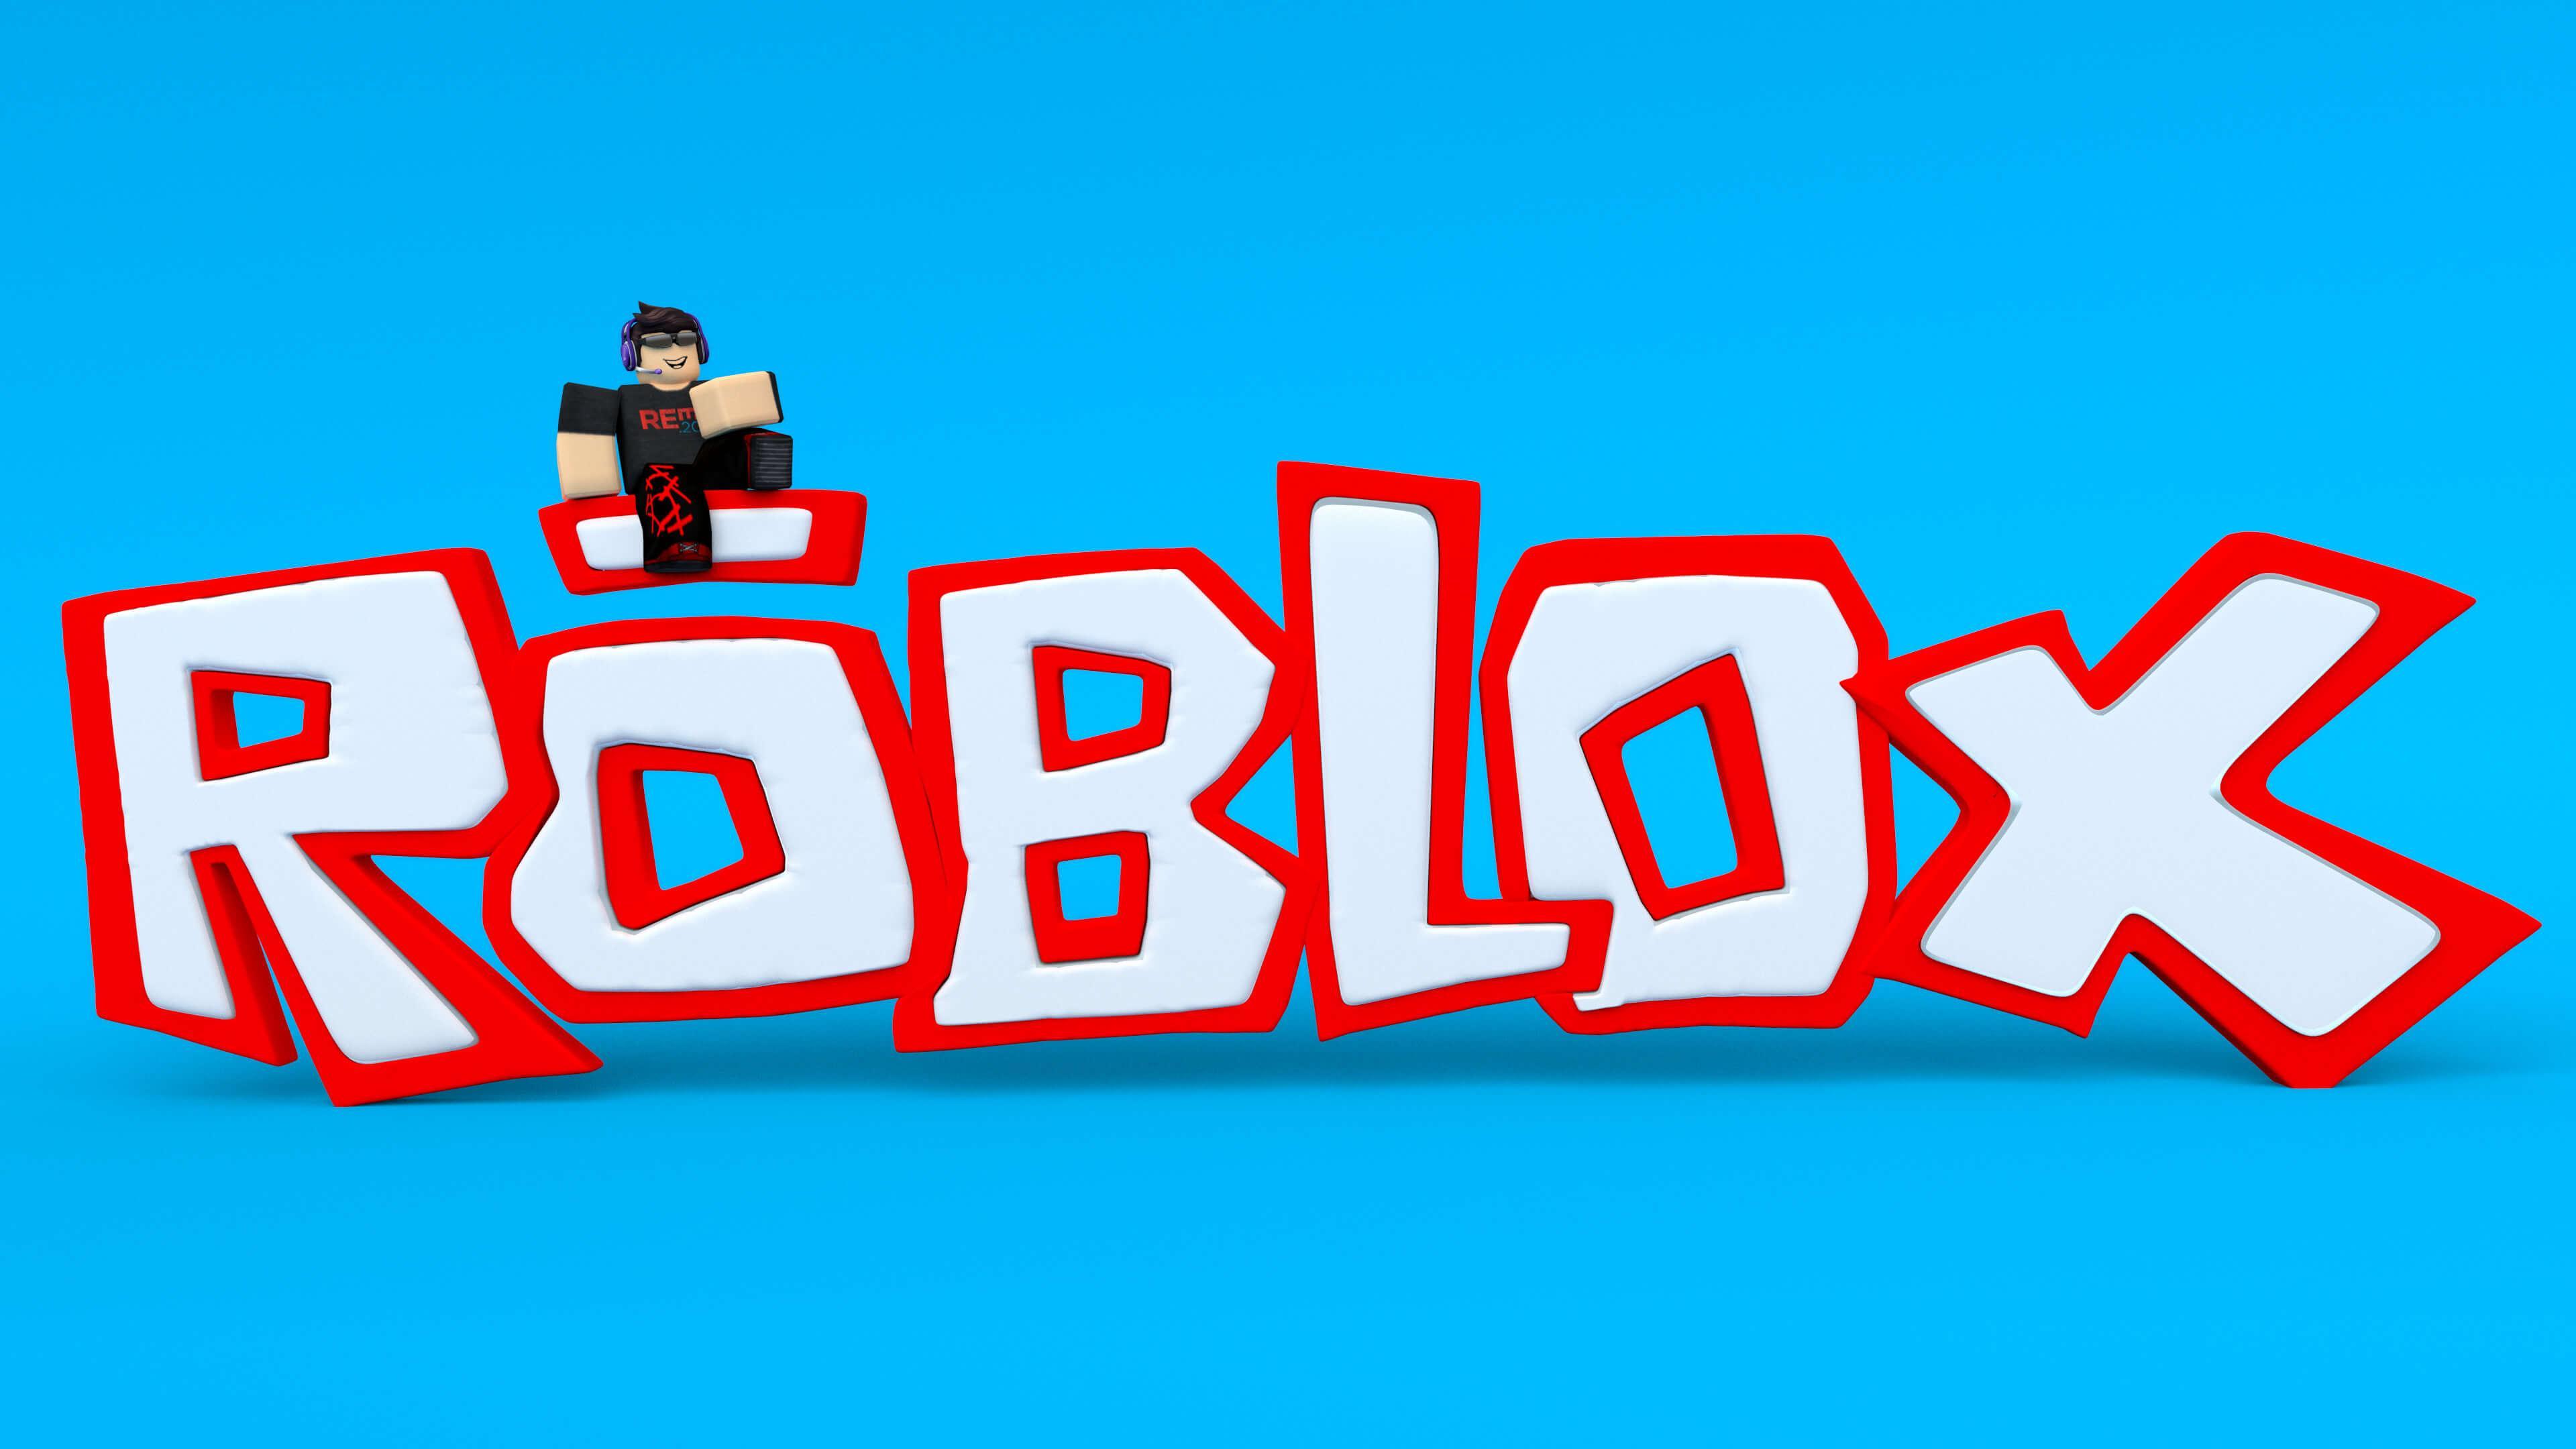 Wallpapers Rblx Rblx Game Free Wallpapers For Android Apk Download - fondos de roblox para tik tok